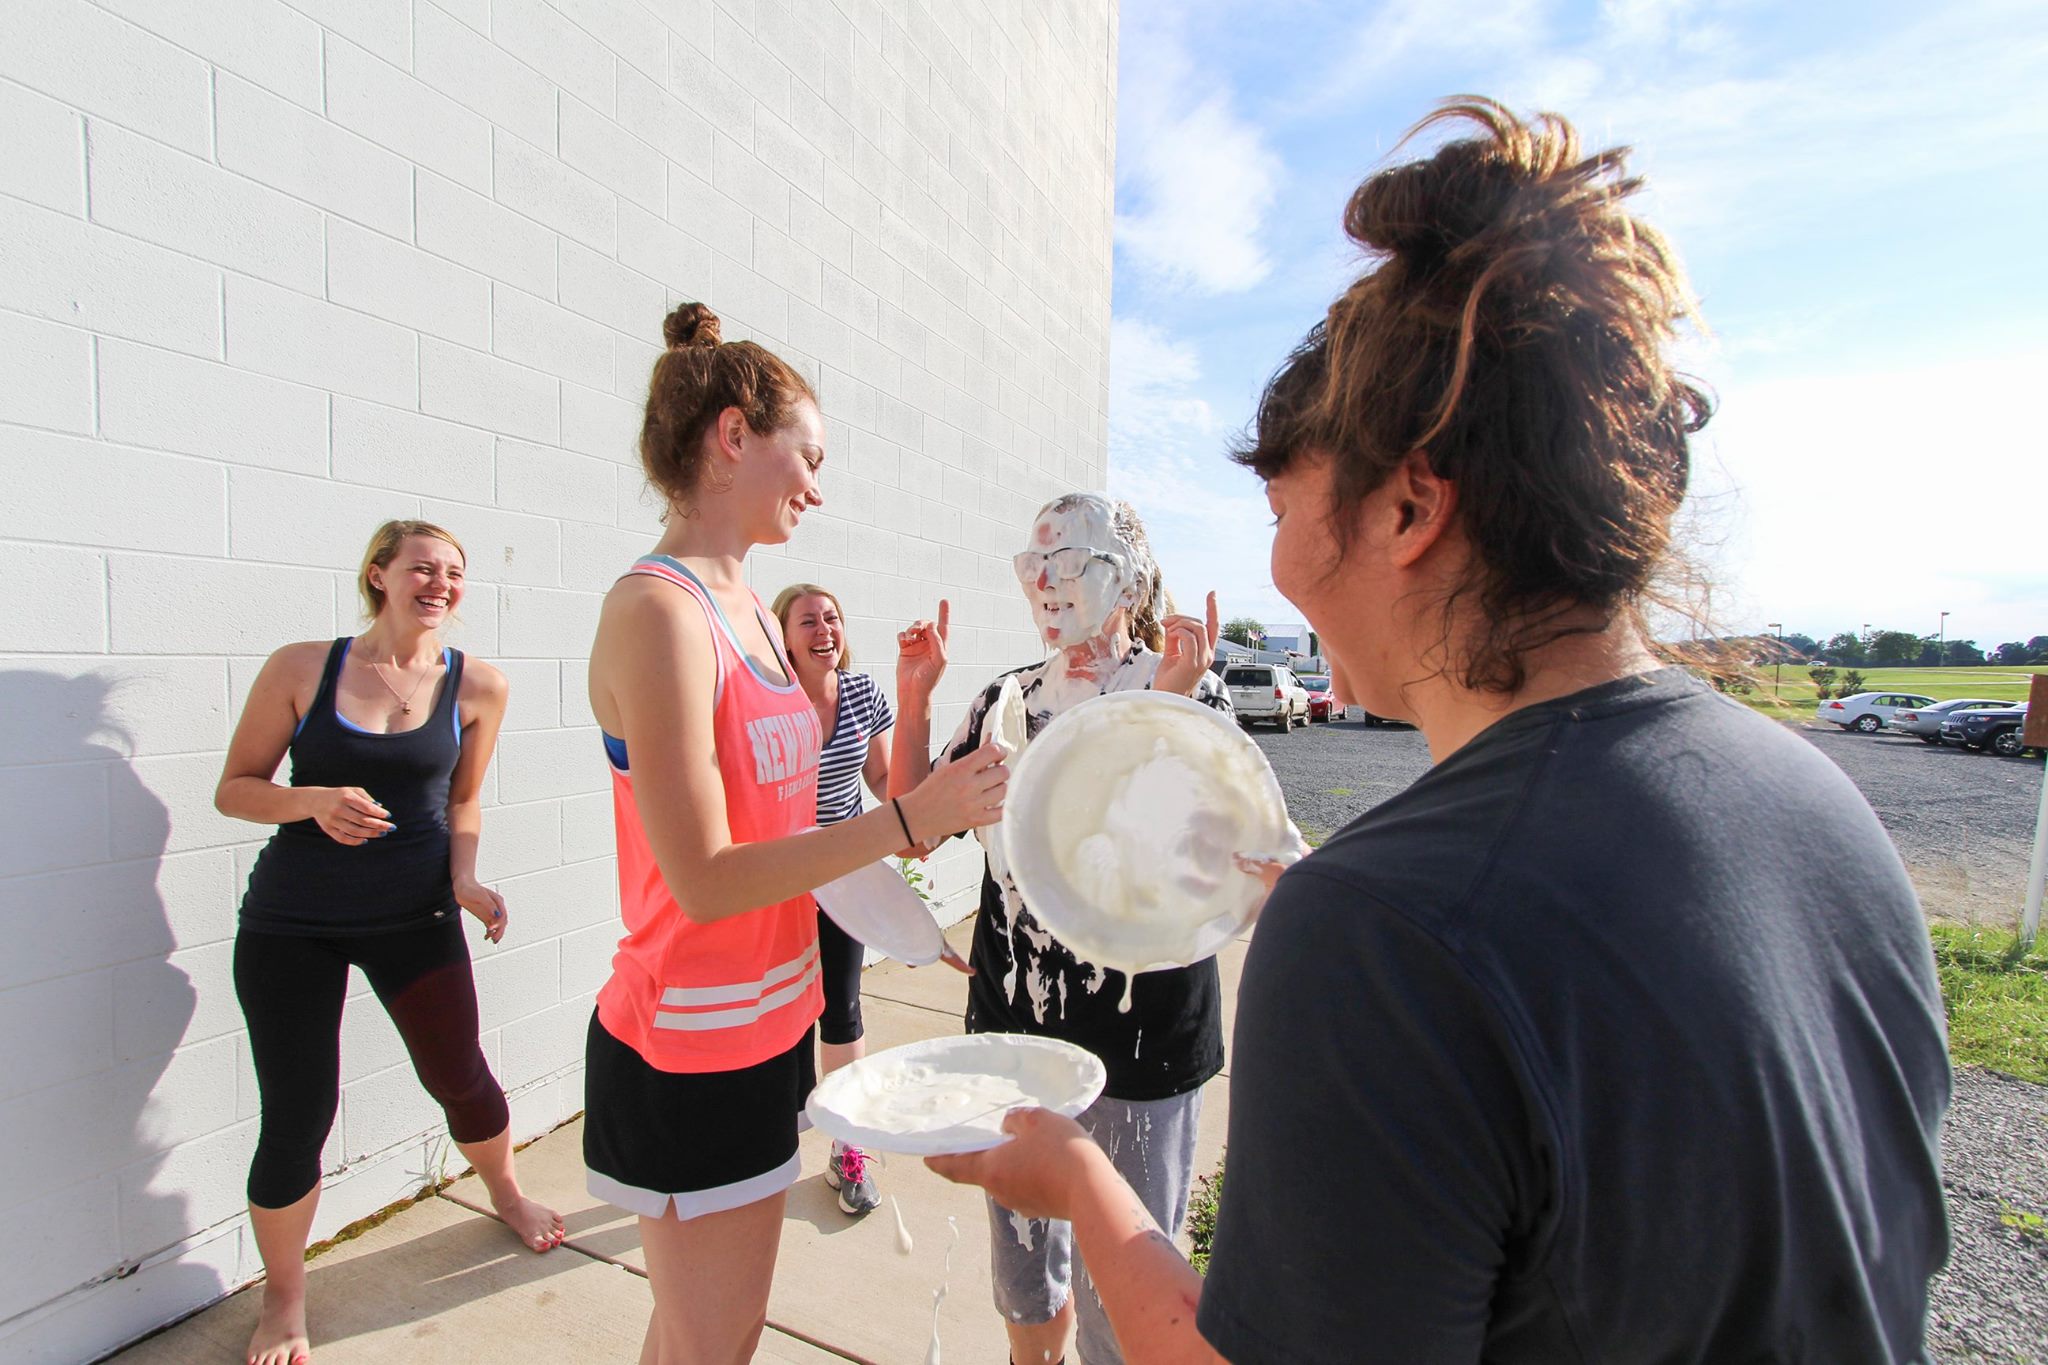 Pie in the face / hair etc.